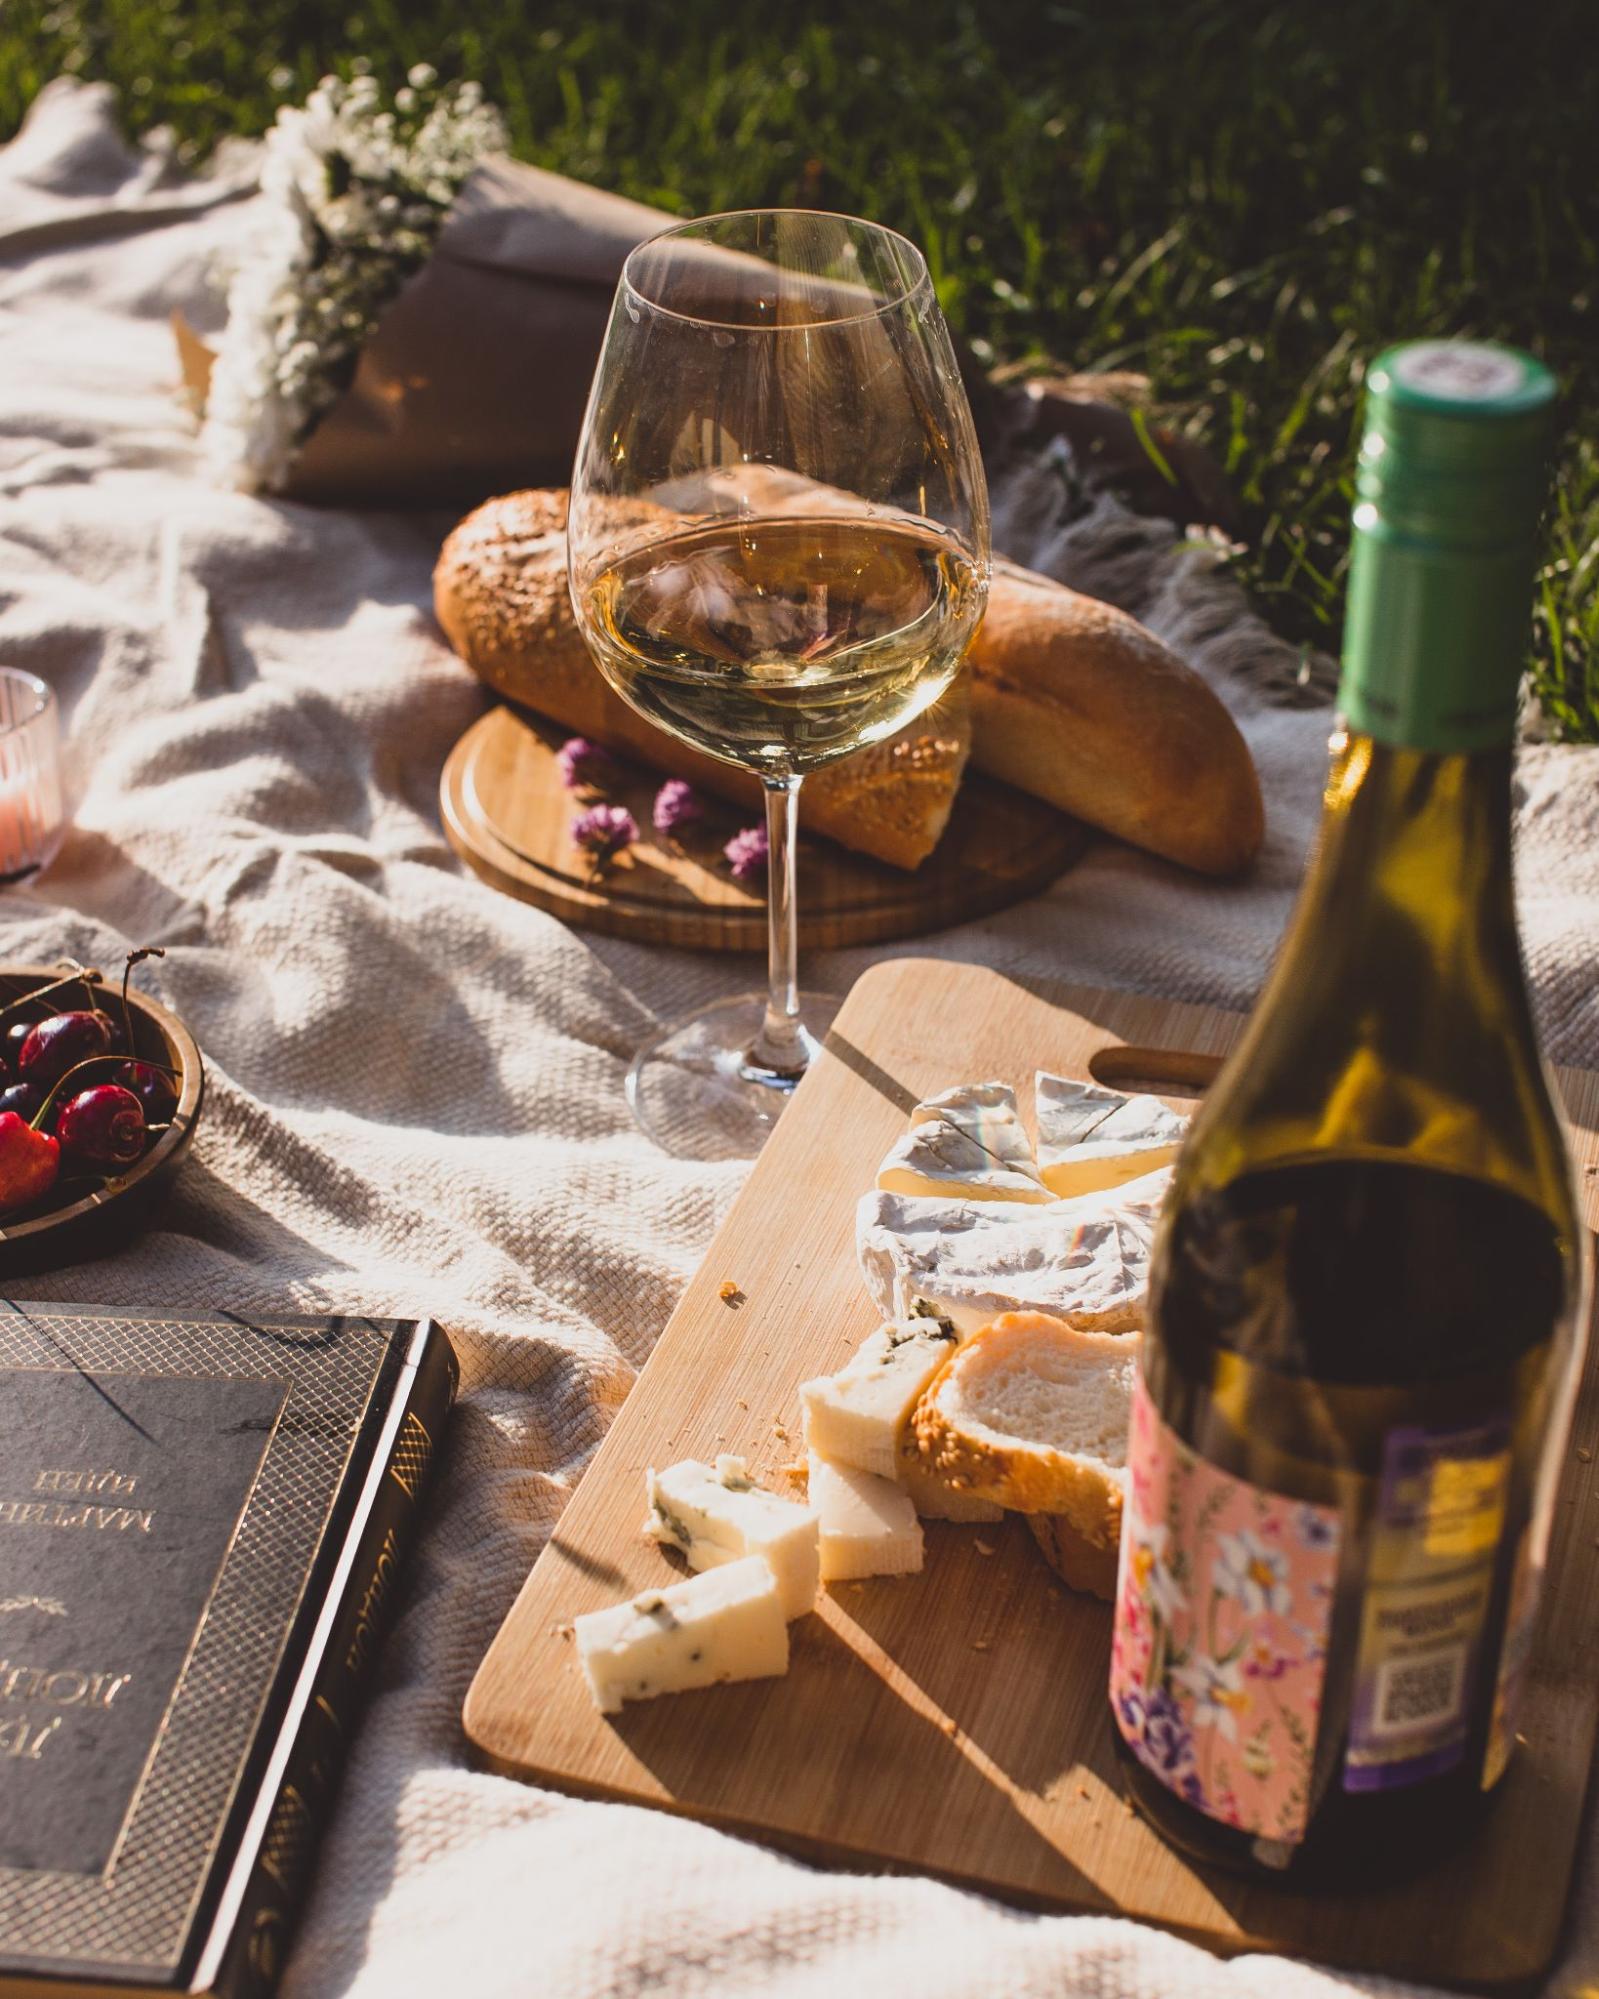 Picnic set up with cheese, baguette and wine